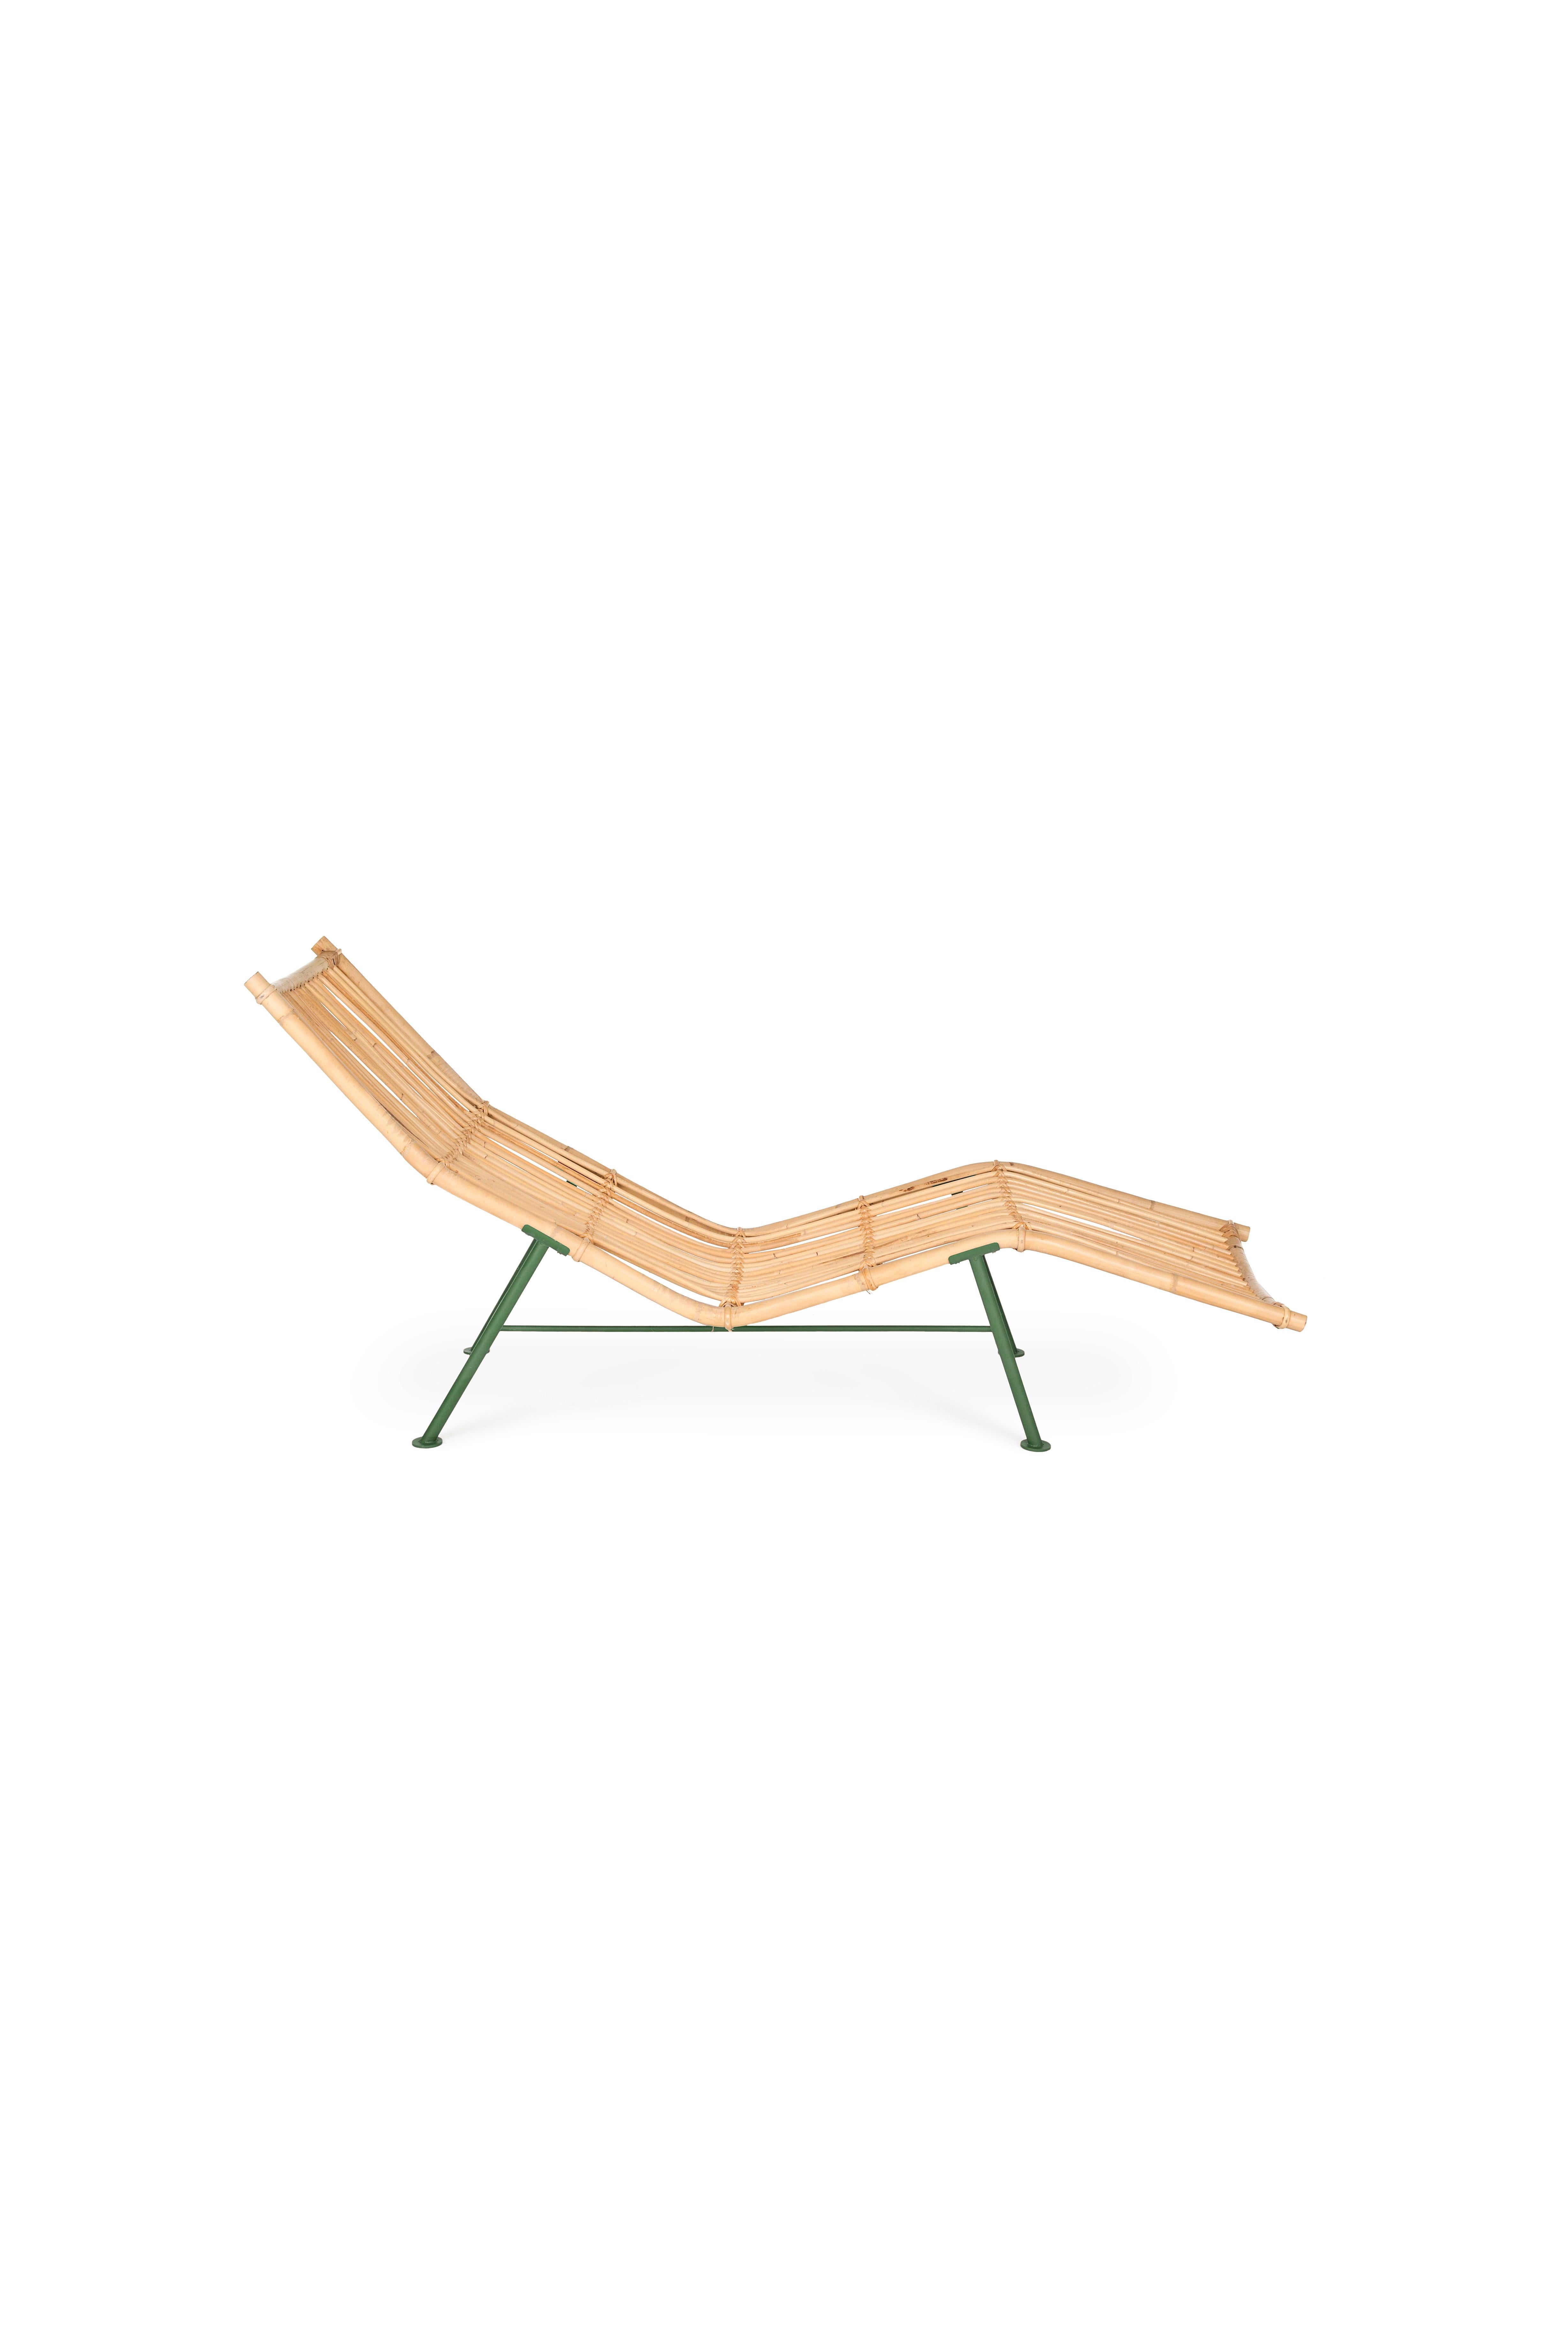 This is the Lensvelt Cane Divan, a rattan Classic designed by the Finnish designer Simo Heikkilä. Made of bamboo with a steel frame in pastel green or brick red. Can only be used inside, not outside.
     